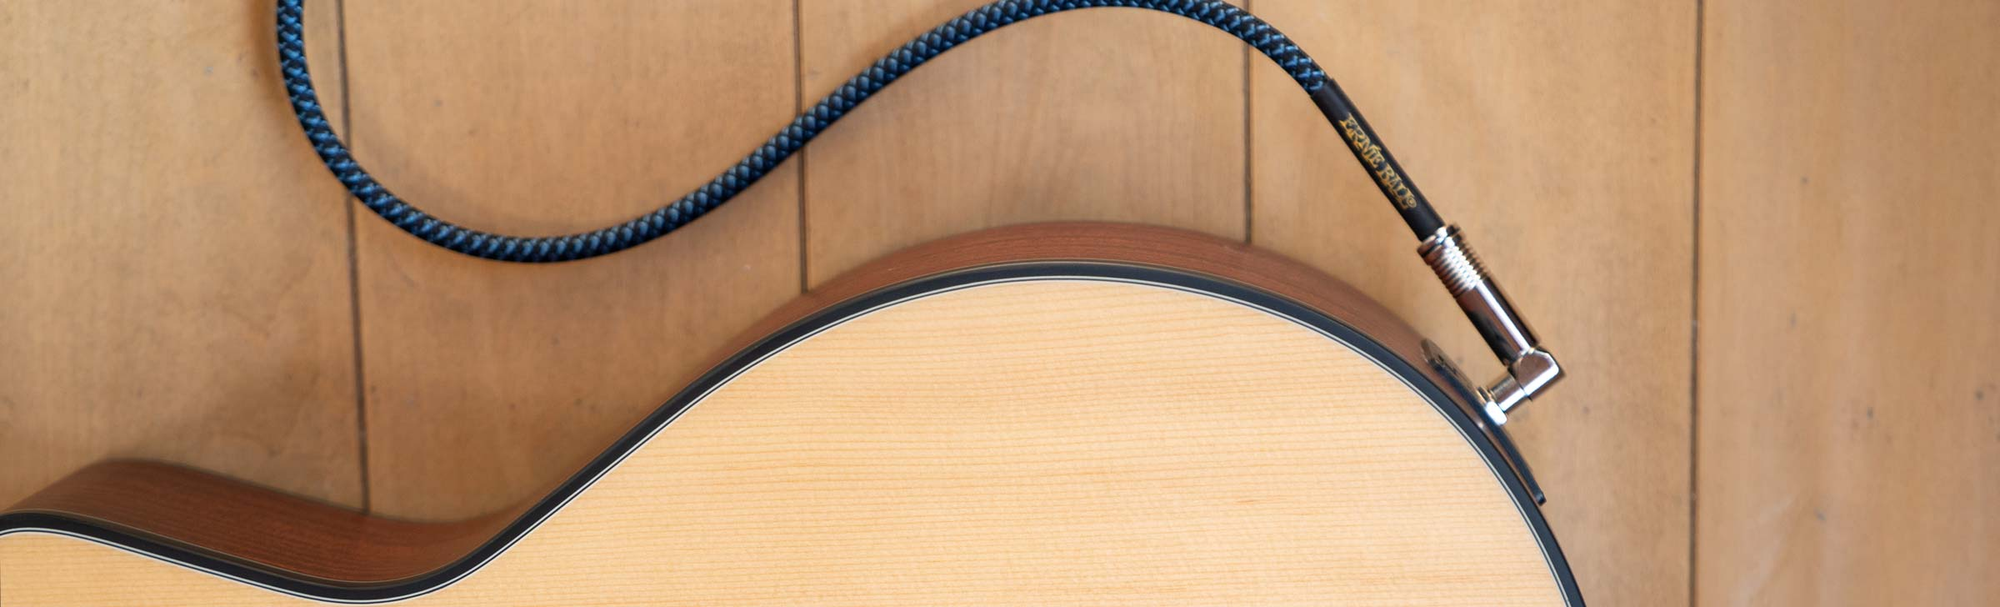 Close up of Ernia Ball braided cable hooked up to Ava Mahogany Live guitar.